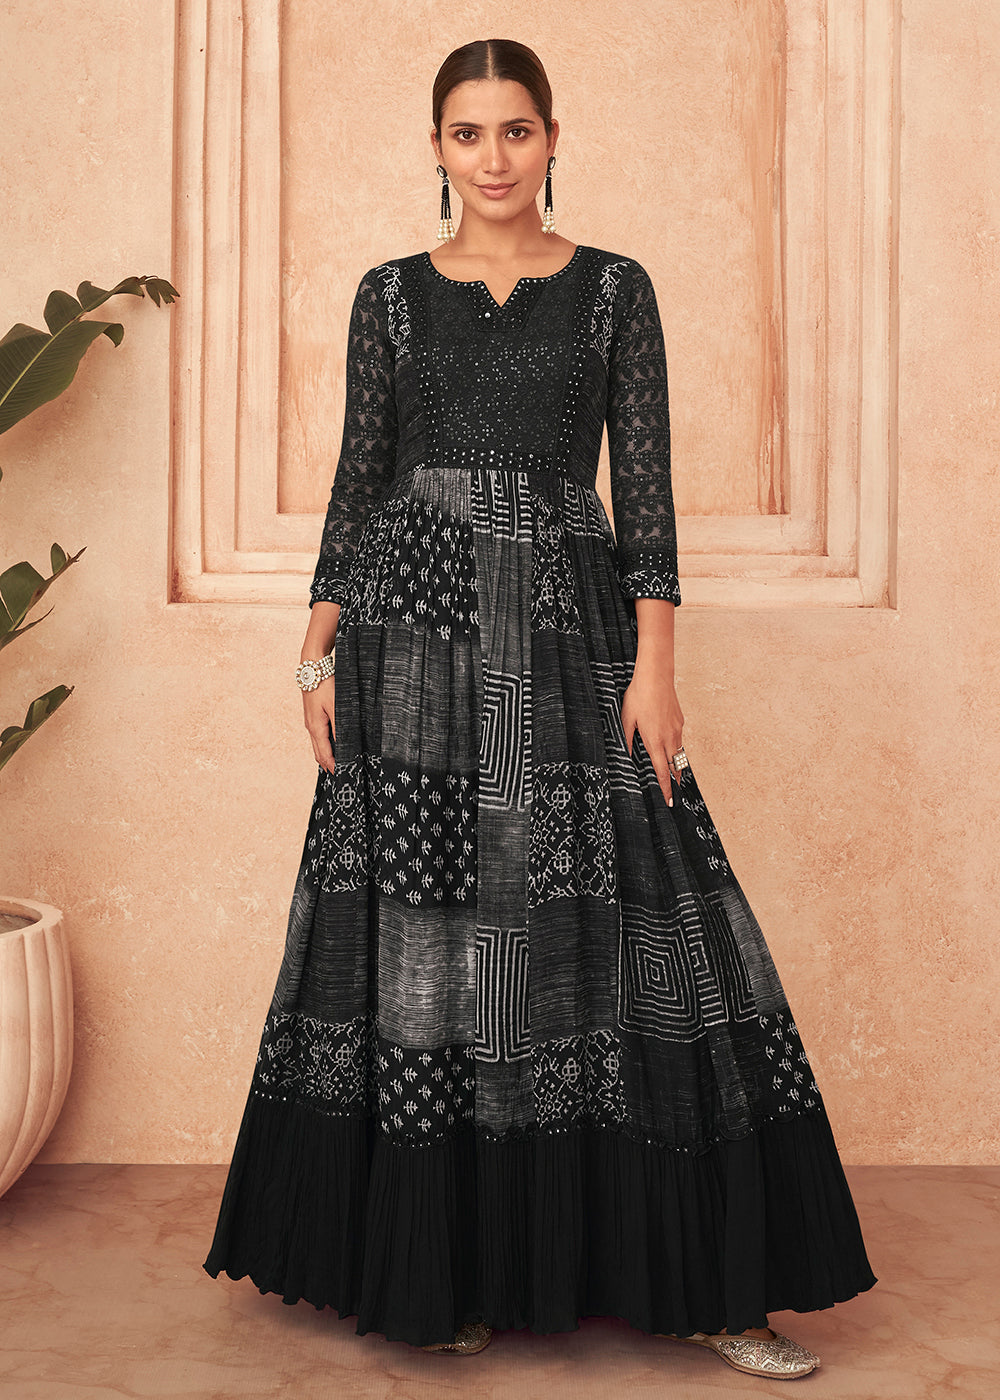 Buy Now Inventive Black Georgette Embroidered Wedding Wear Gown Online in USA, UK, Australia, New Zealand, Canada & Worldwide at Empress Clothing.